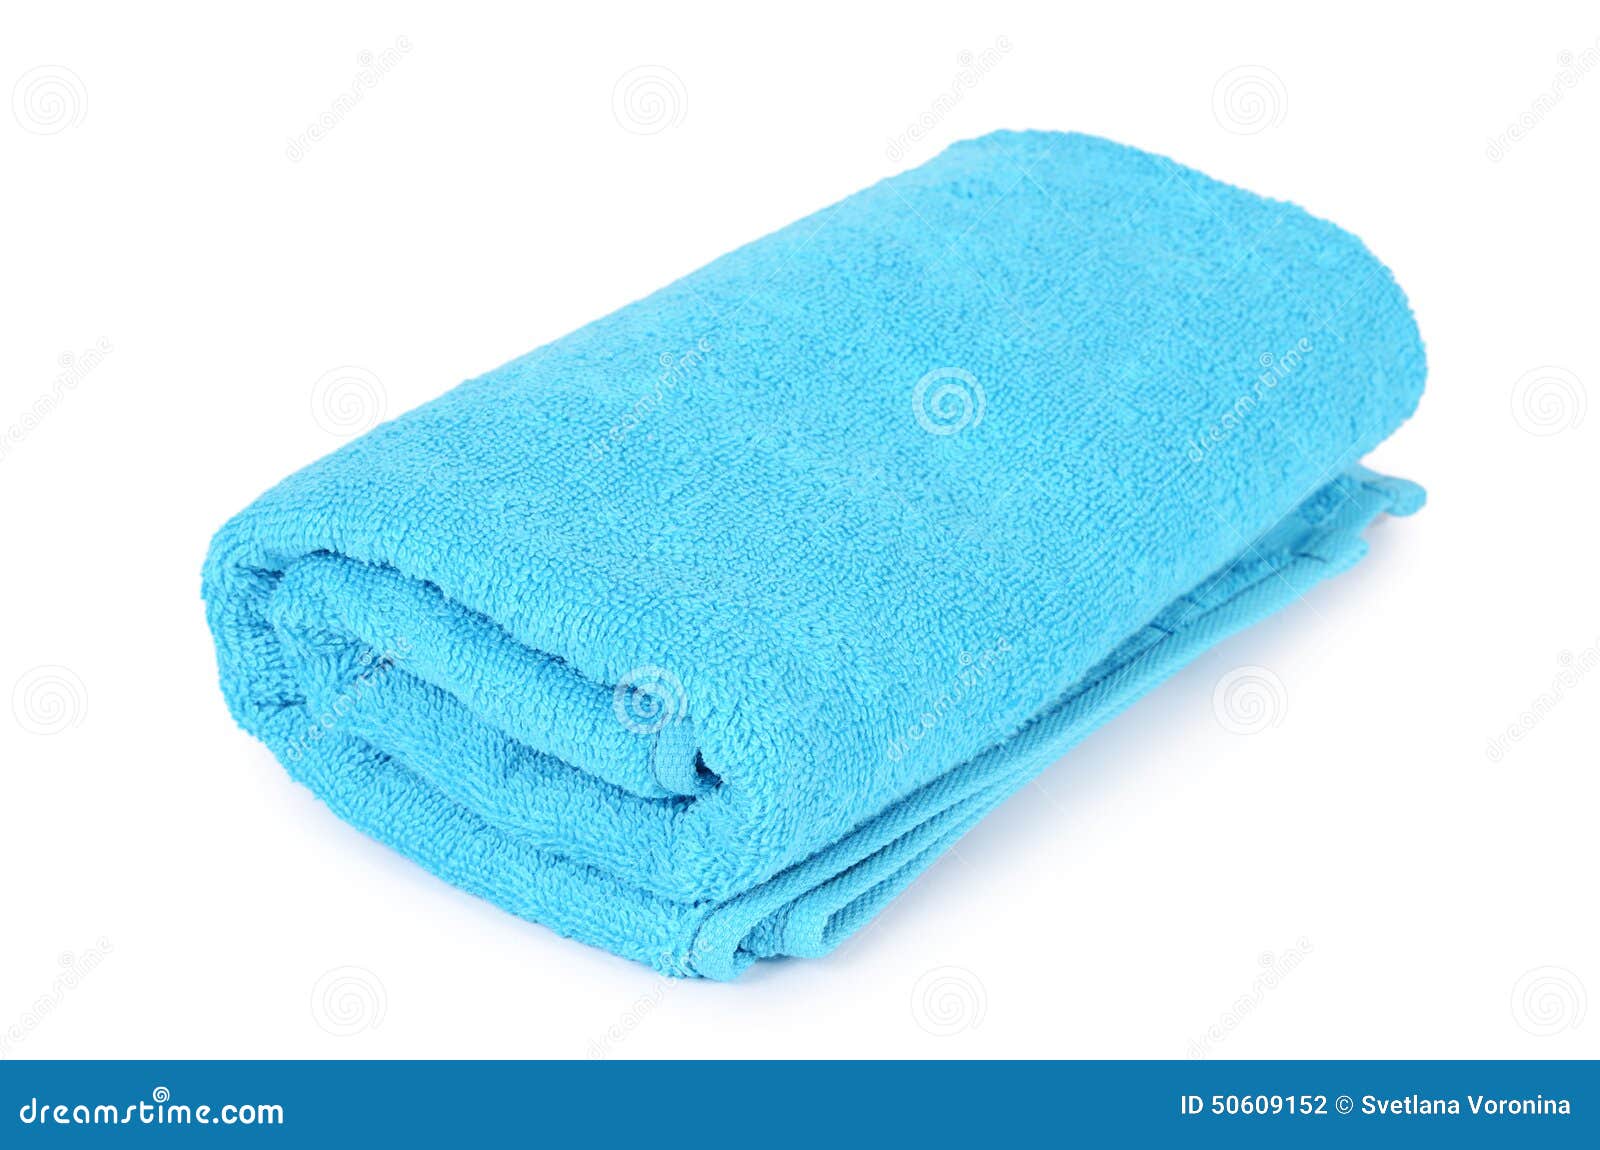 blue towel  on white background